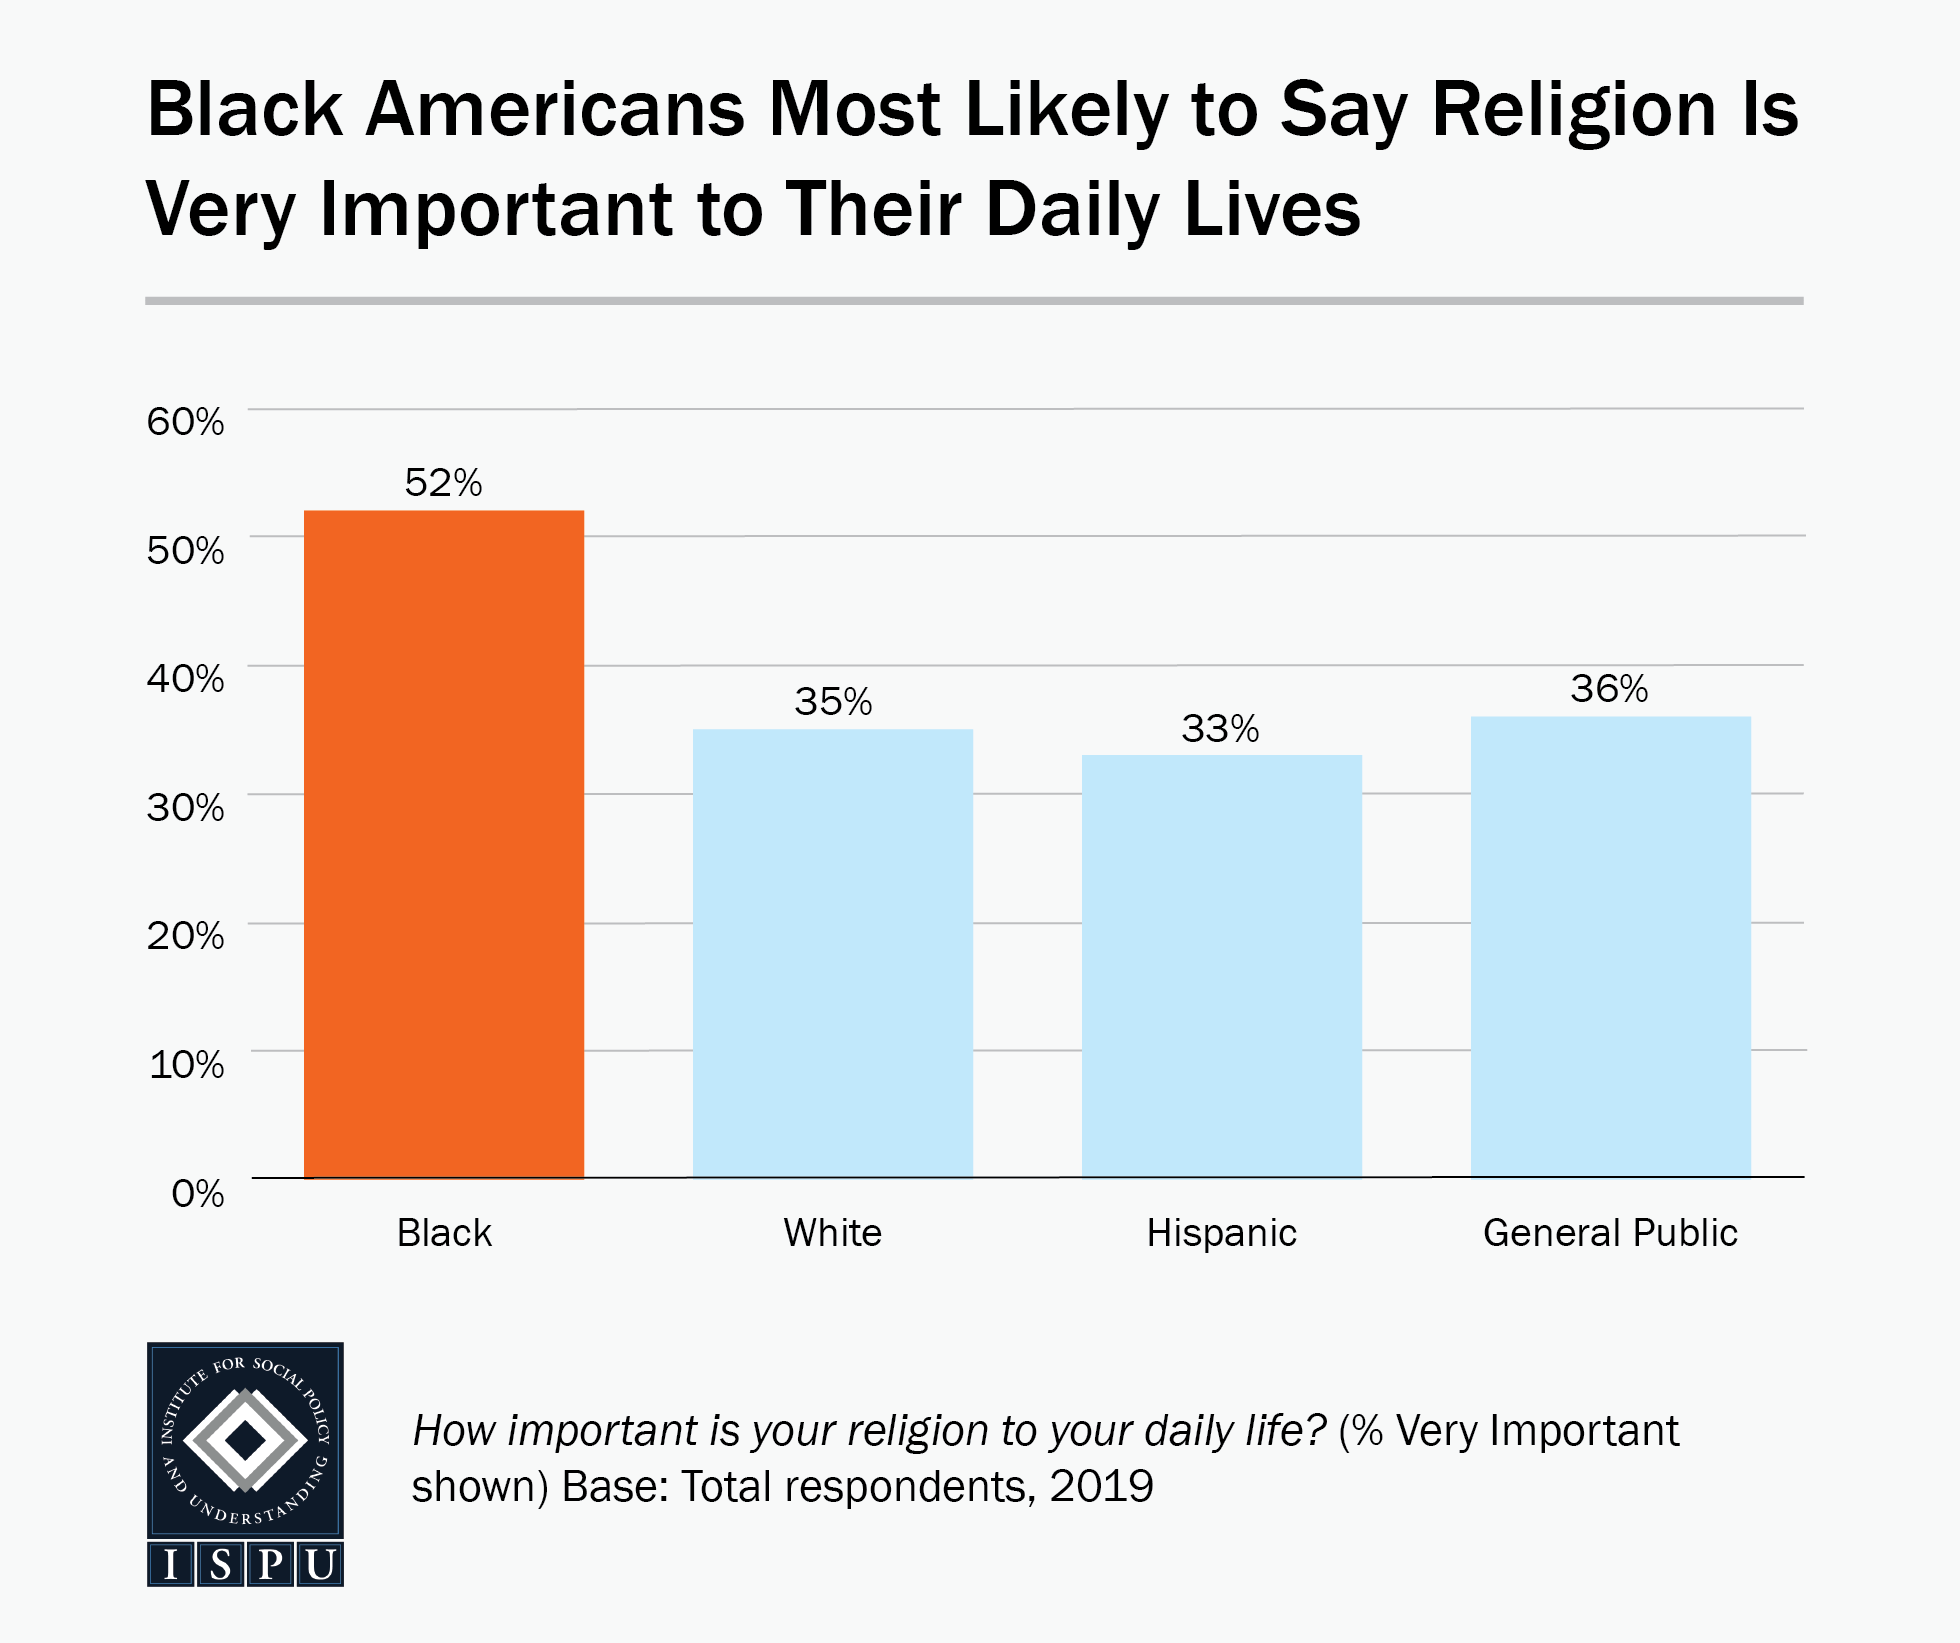 Bar graph showing that Black Americans (52%) are most likely to say religion is very important to their daily lives